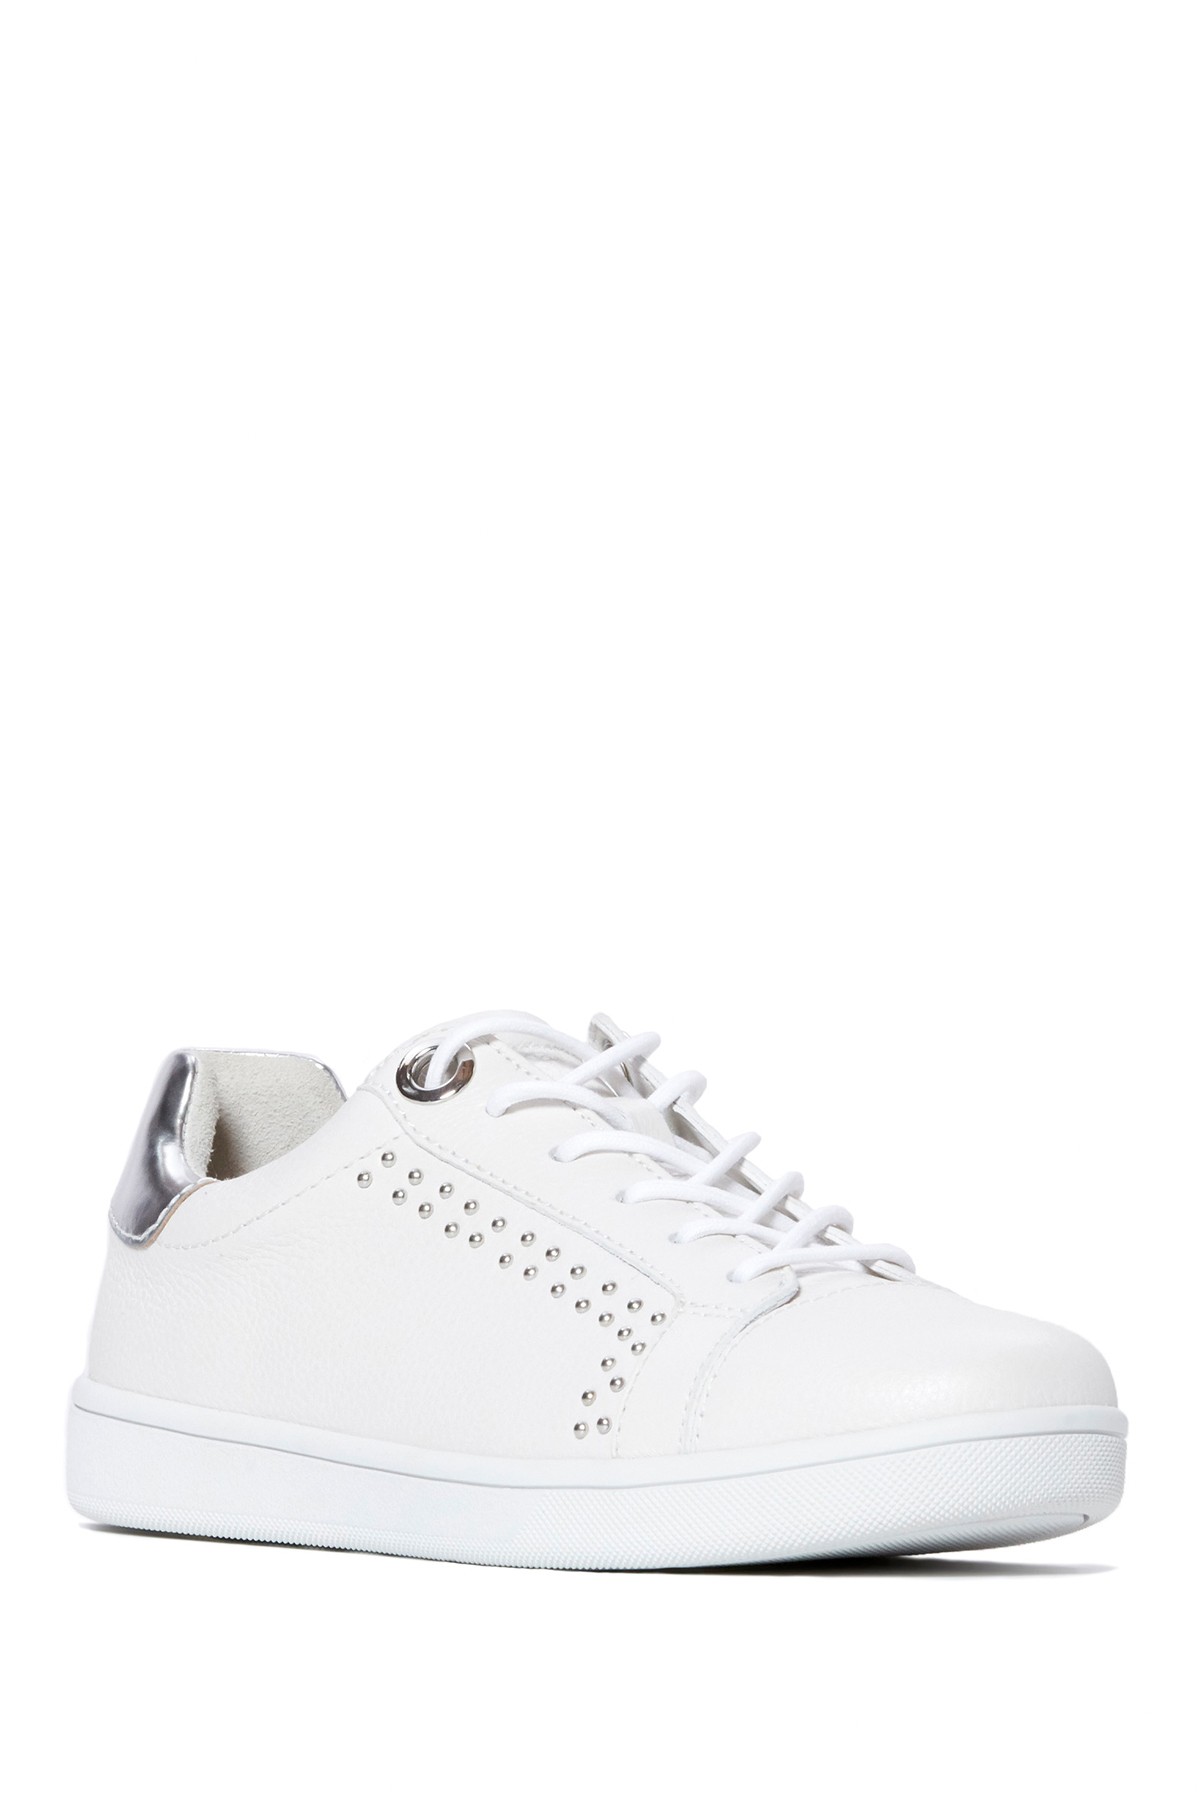 Alina Studded Sneaker Paige